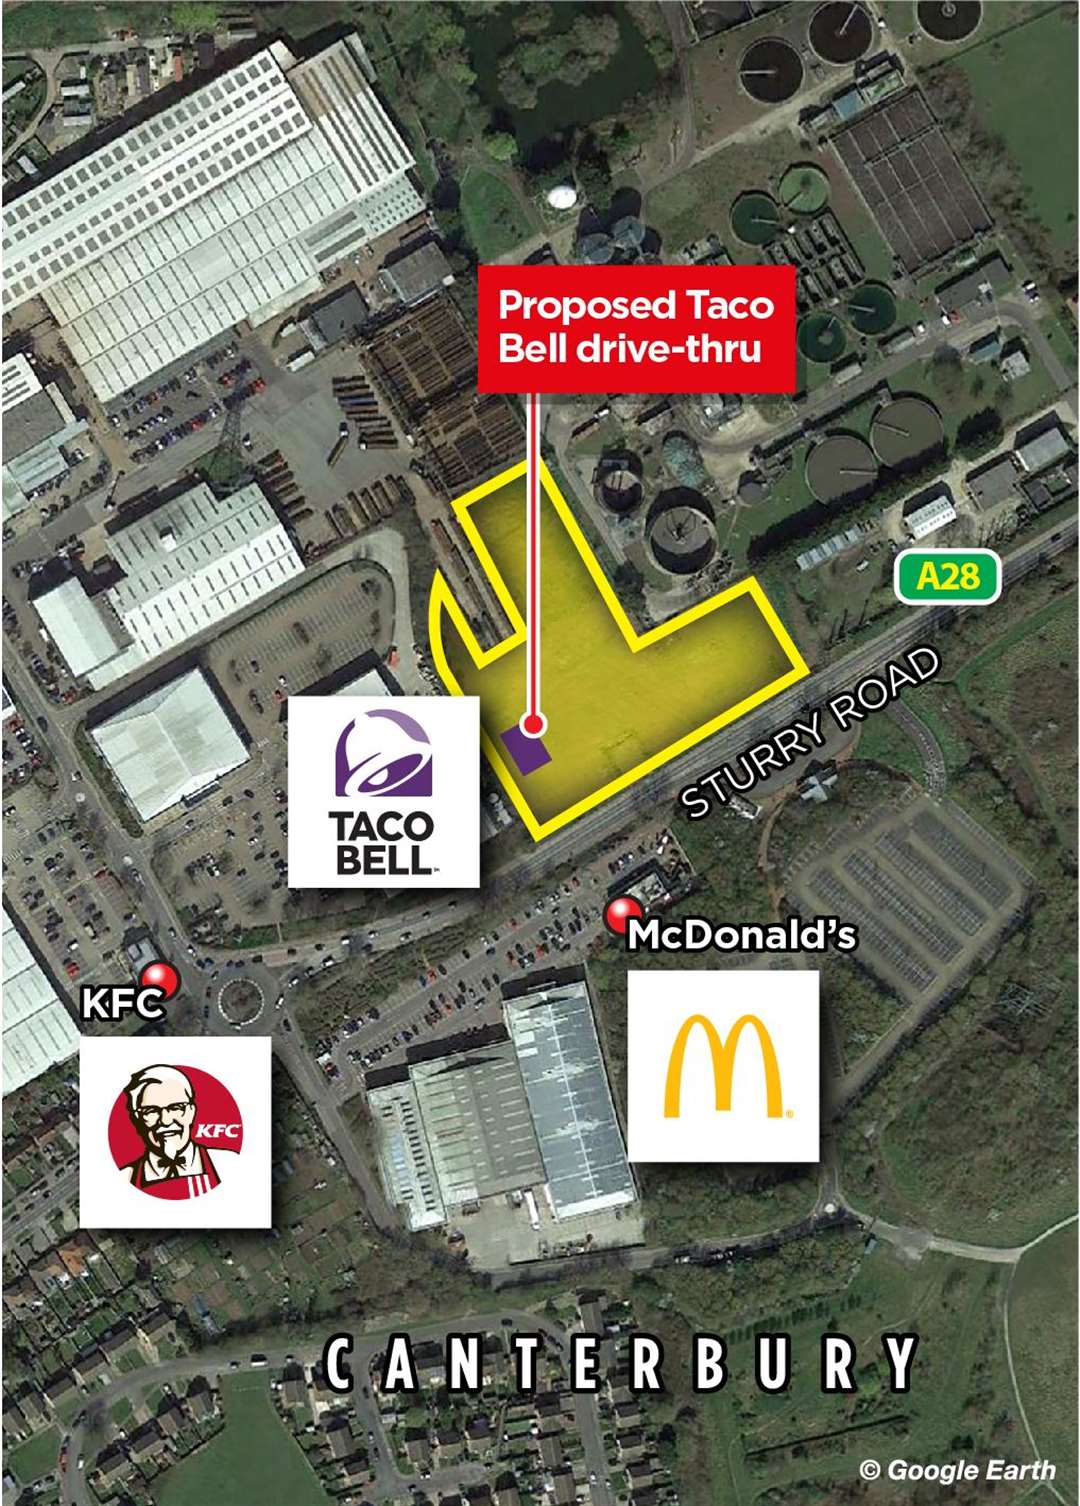 The Taco Bell in Sturry Road will be located near to KFC and McDonald's